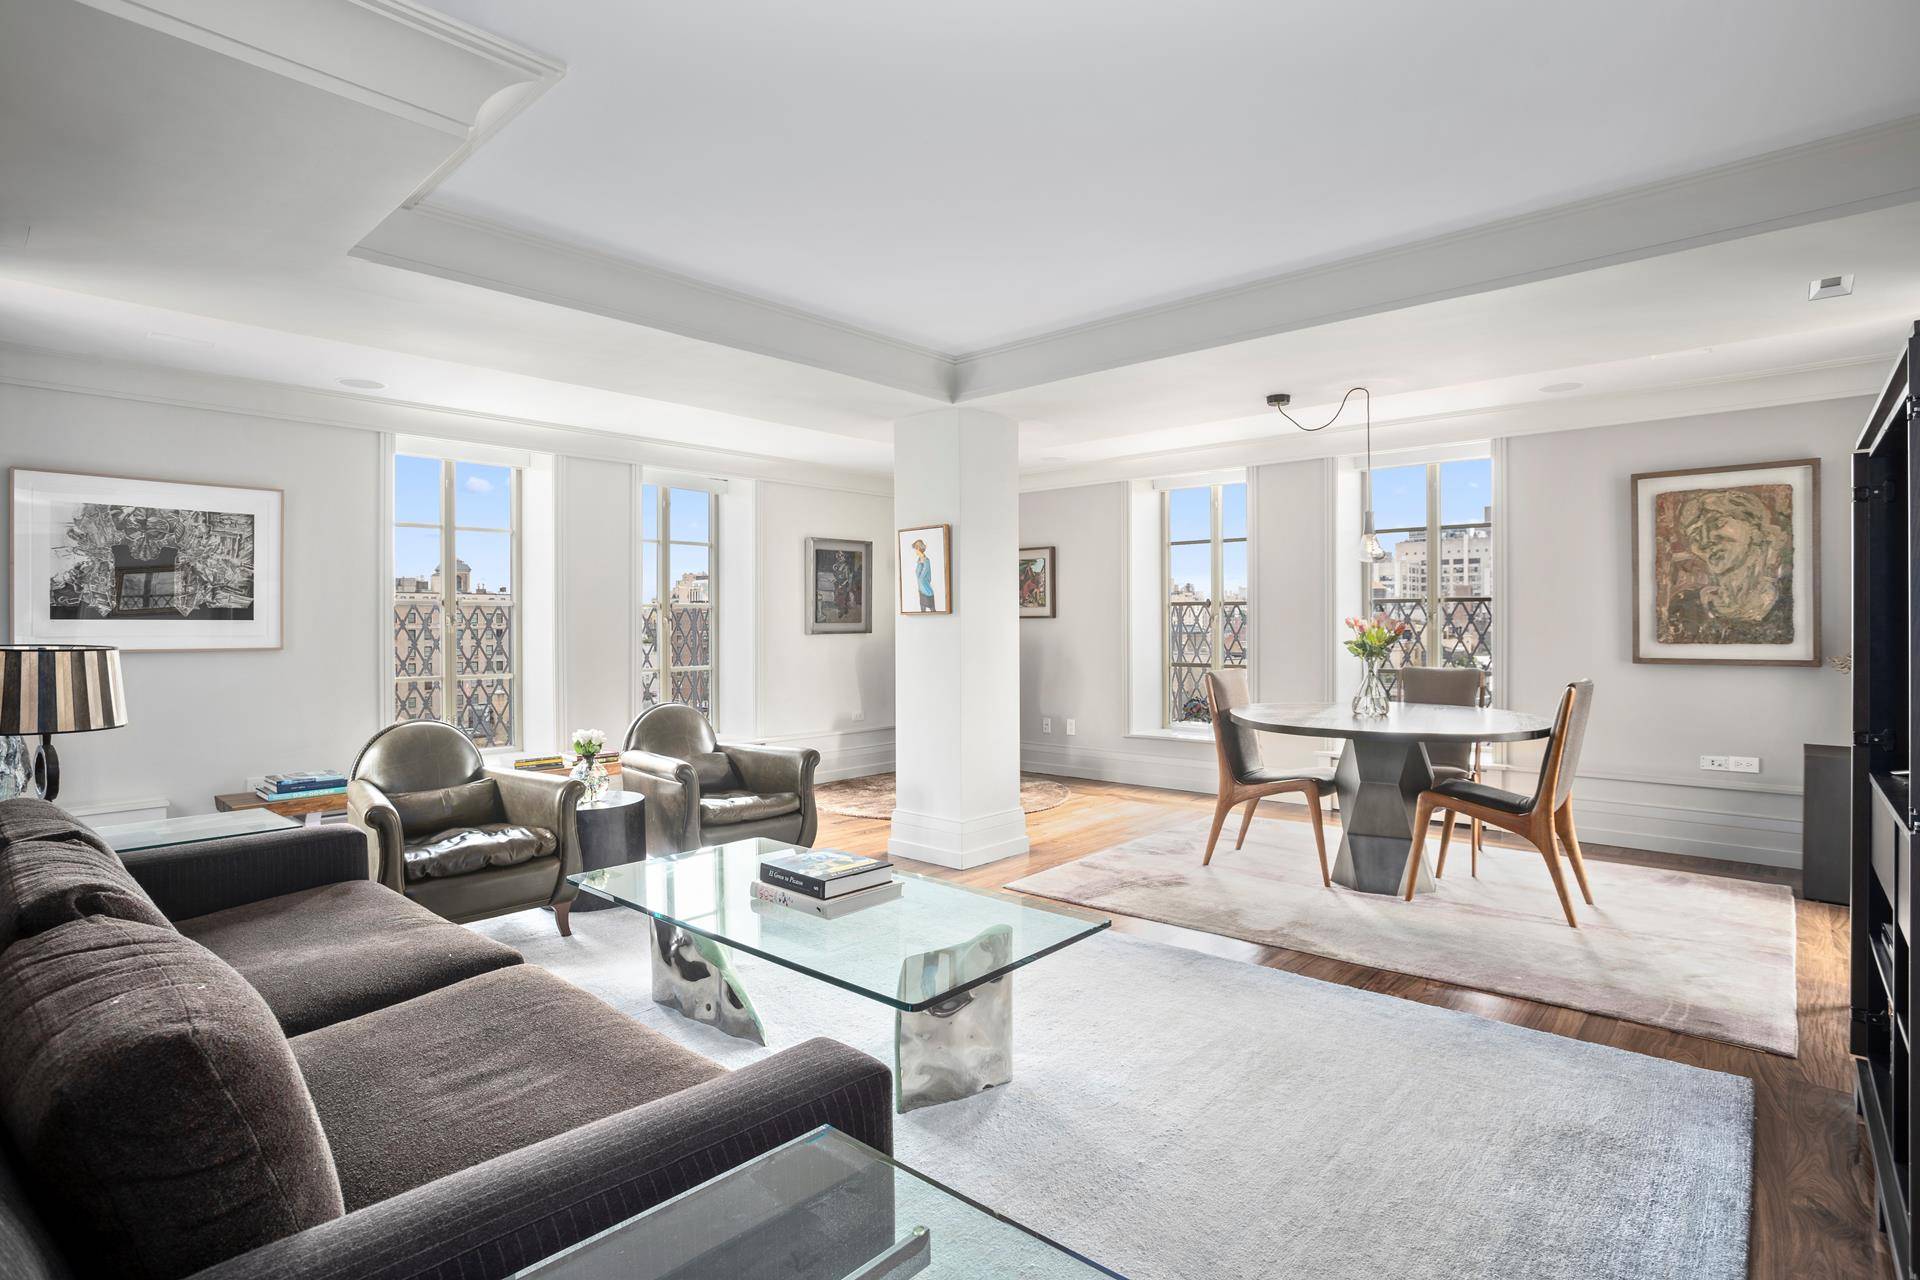 Spacious, bright and exquisitely designed 1, 771 SF 2 Bedroom, 2.